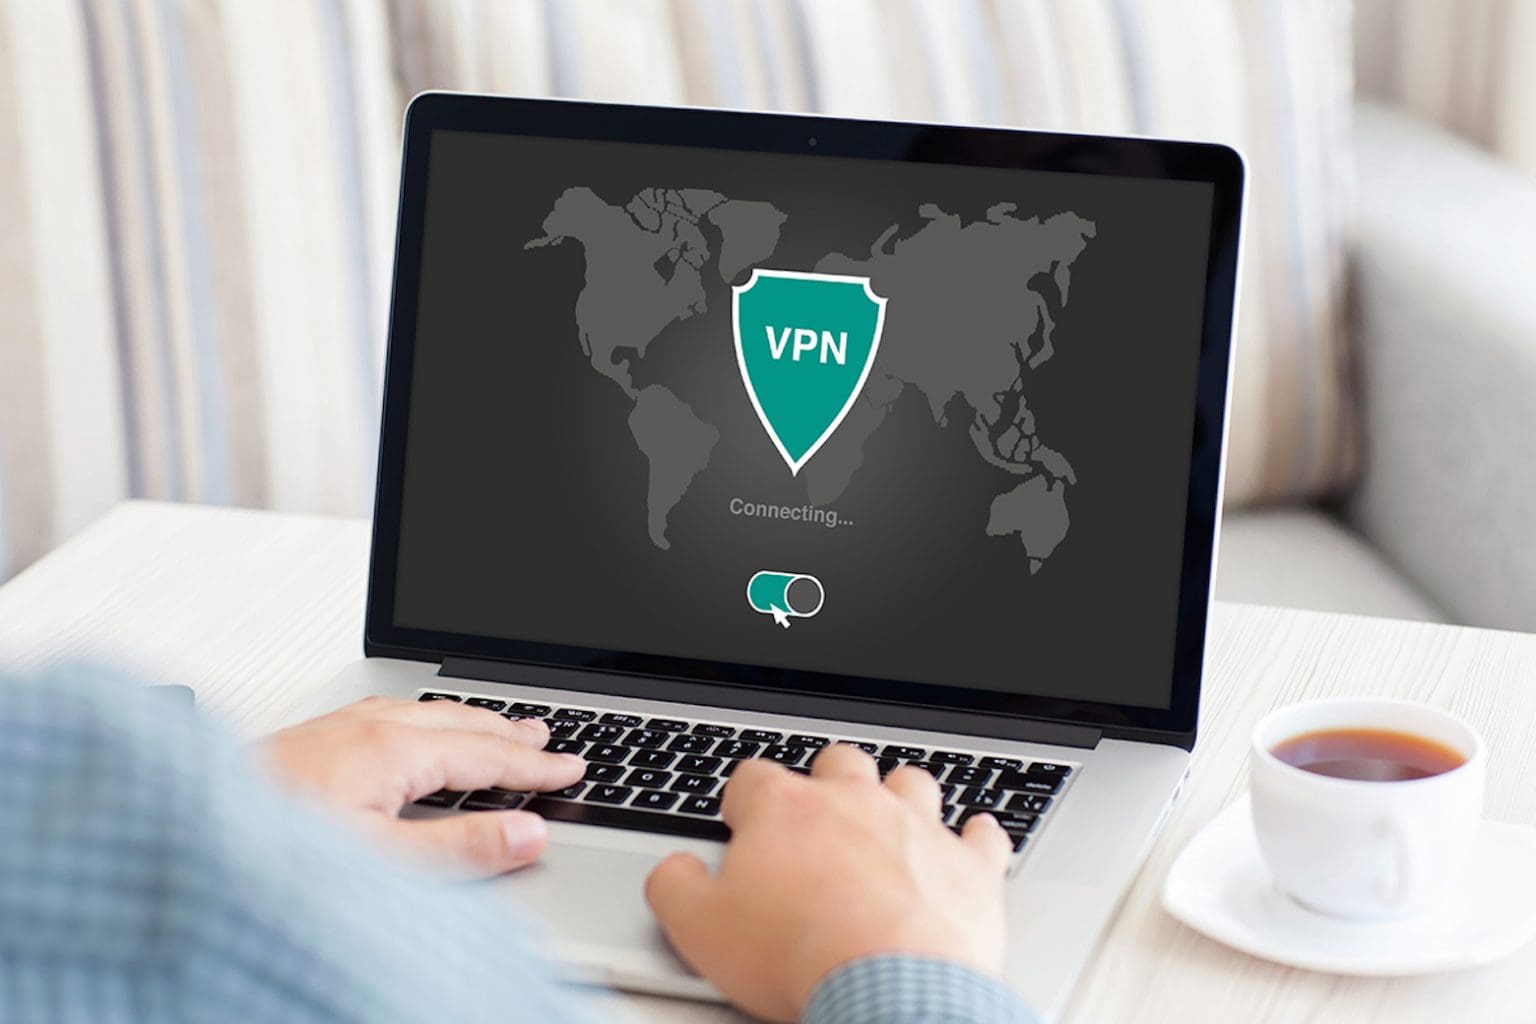 Get a lifetime of safe browsing with KeepSolid VPN